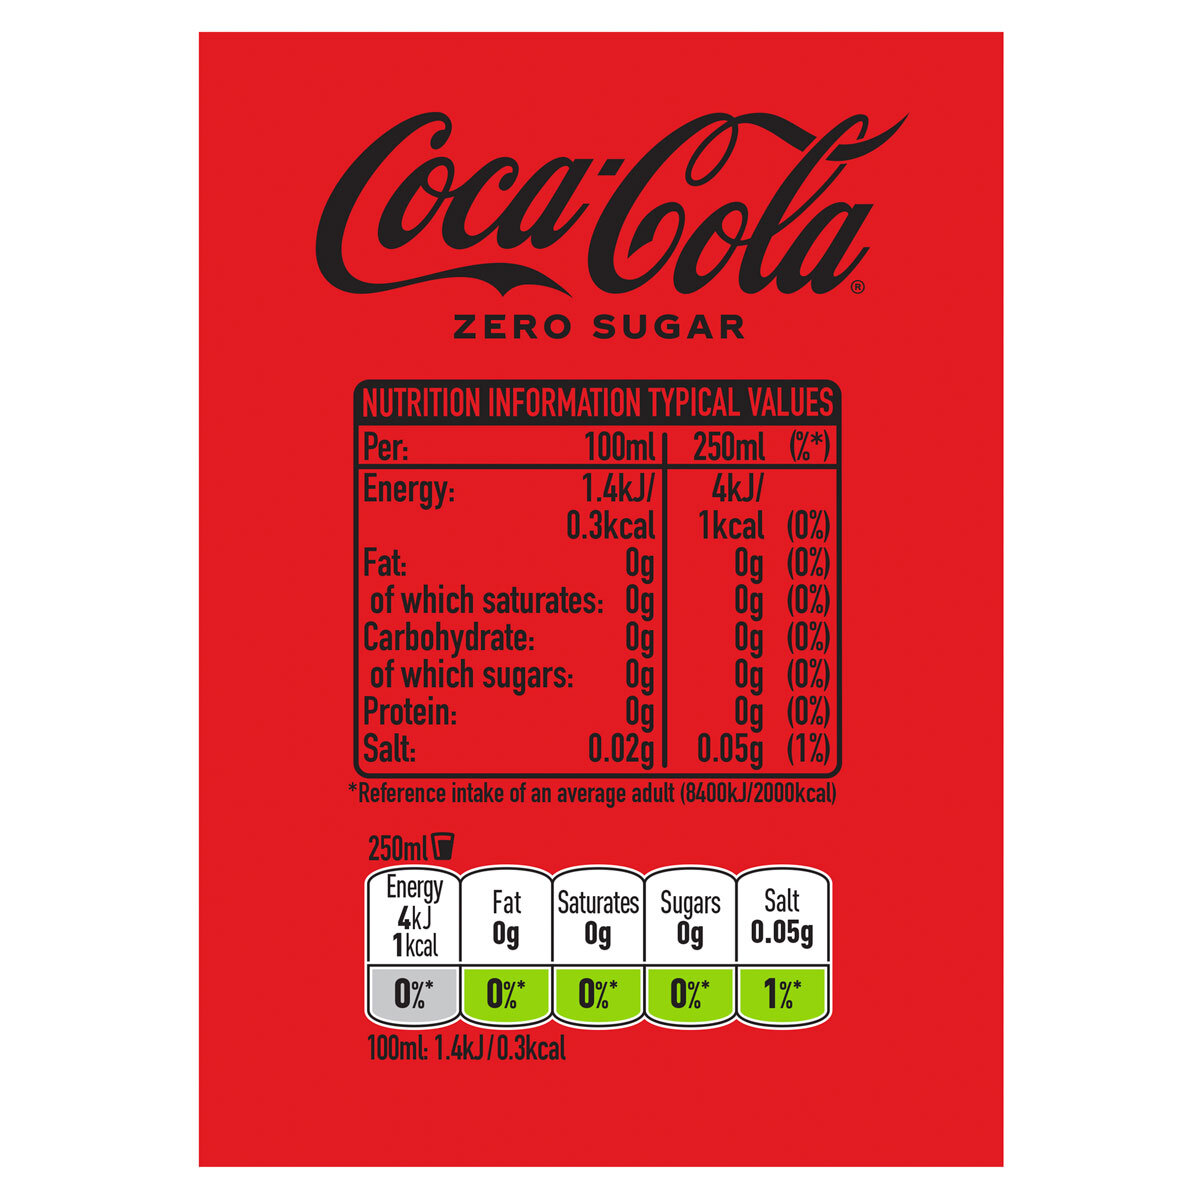 Nutritional information on red background